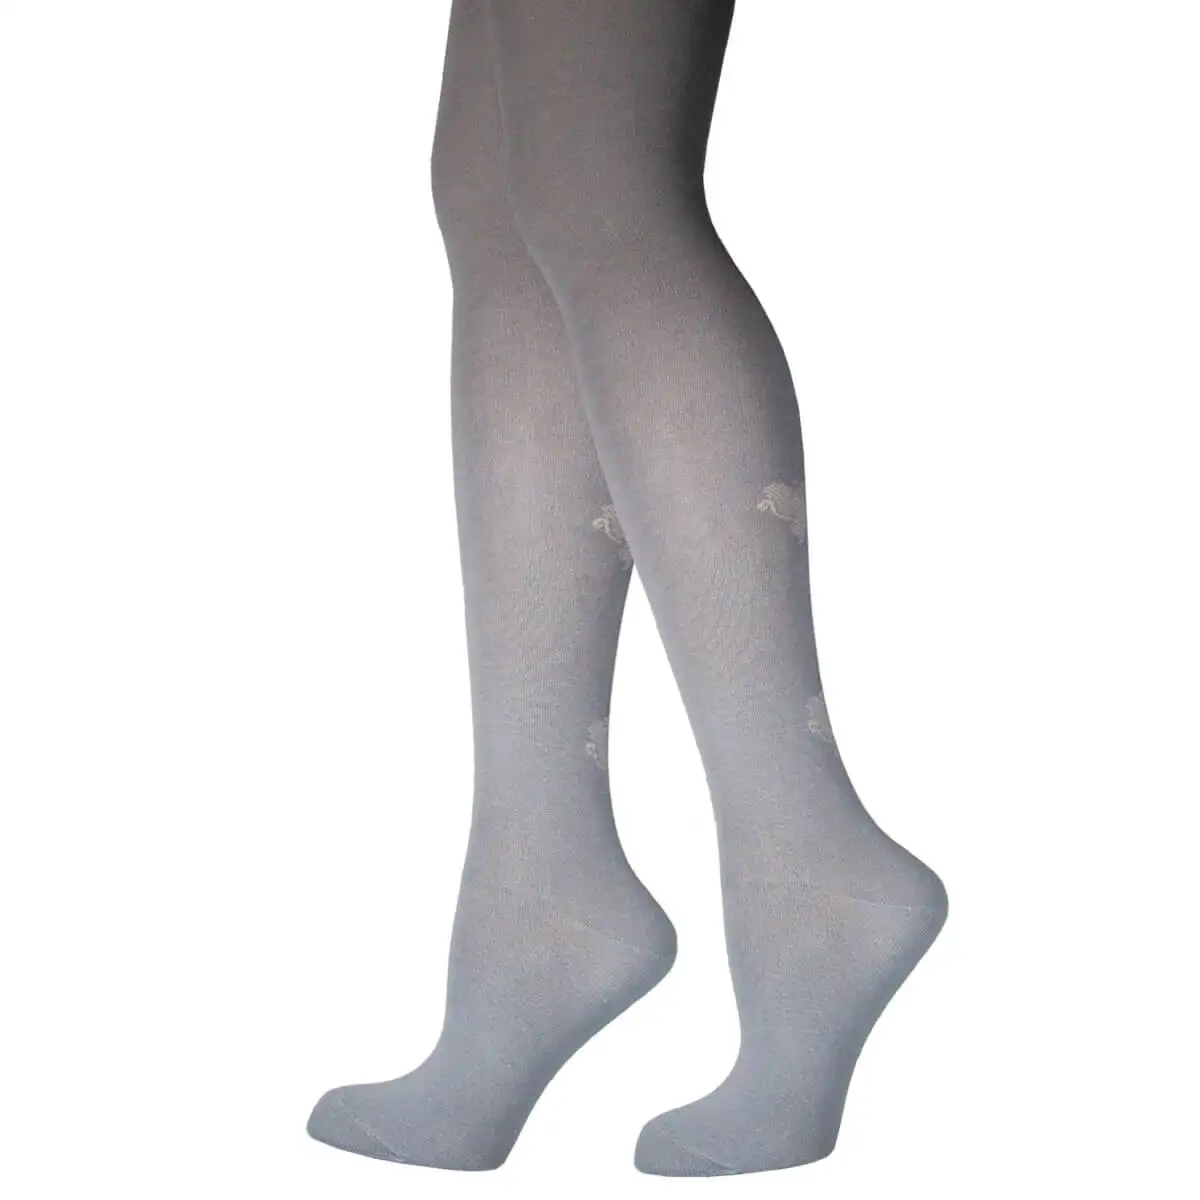 Source Hot Selling Product Fashionable Designed Tights For Girls Of School  Age From Russian Manufacturer Low Price on m.